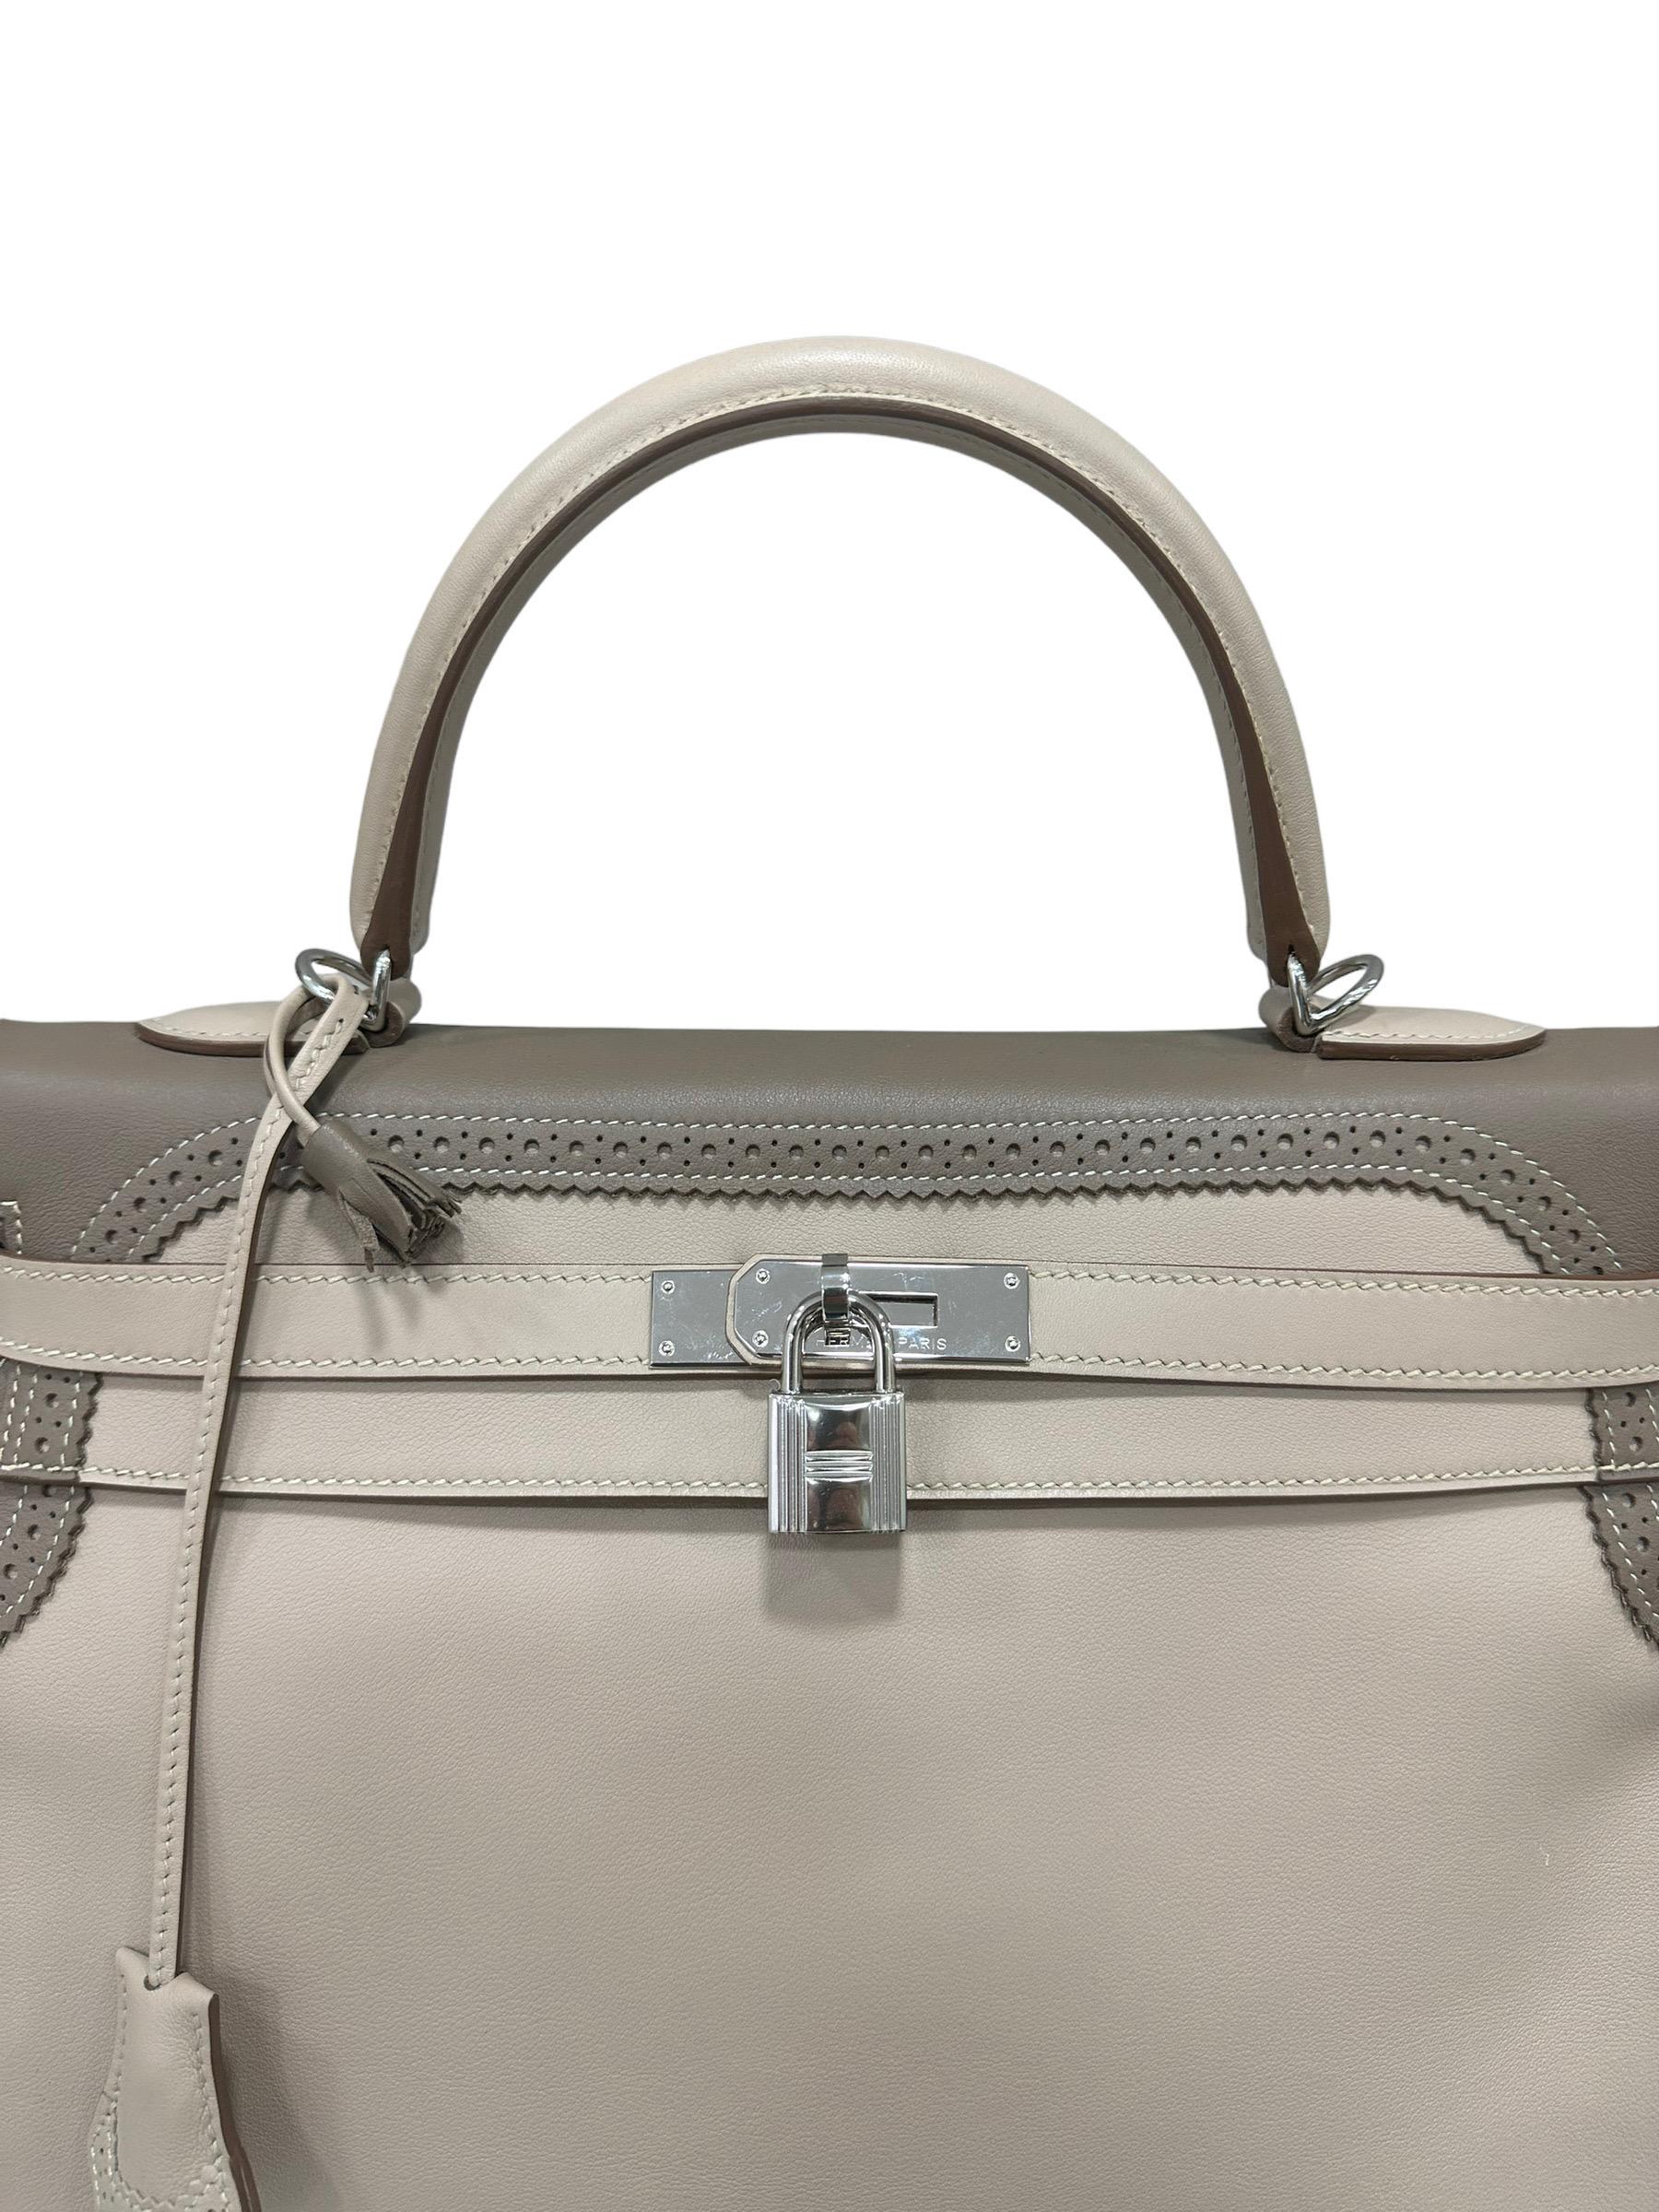 Bag by Hermès, Kelly Ghillies model, size 35, made of Ever Calf leather, smooth and soft to the touch, in the two-tone Craie/Taupe colourway. Equipped with a flap with interlocking closure, with horizontal band padlock and keys. Equipped with a